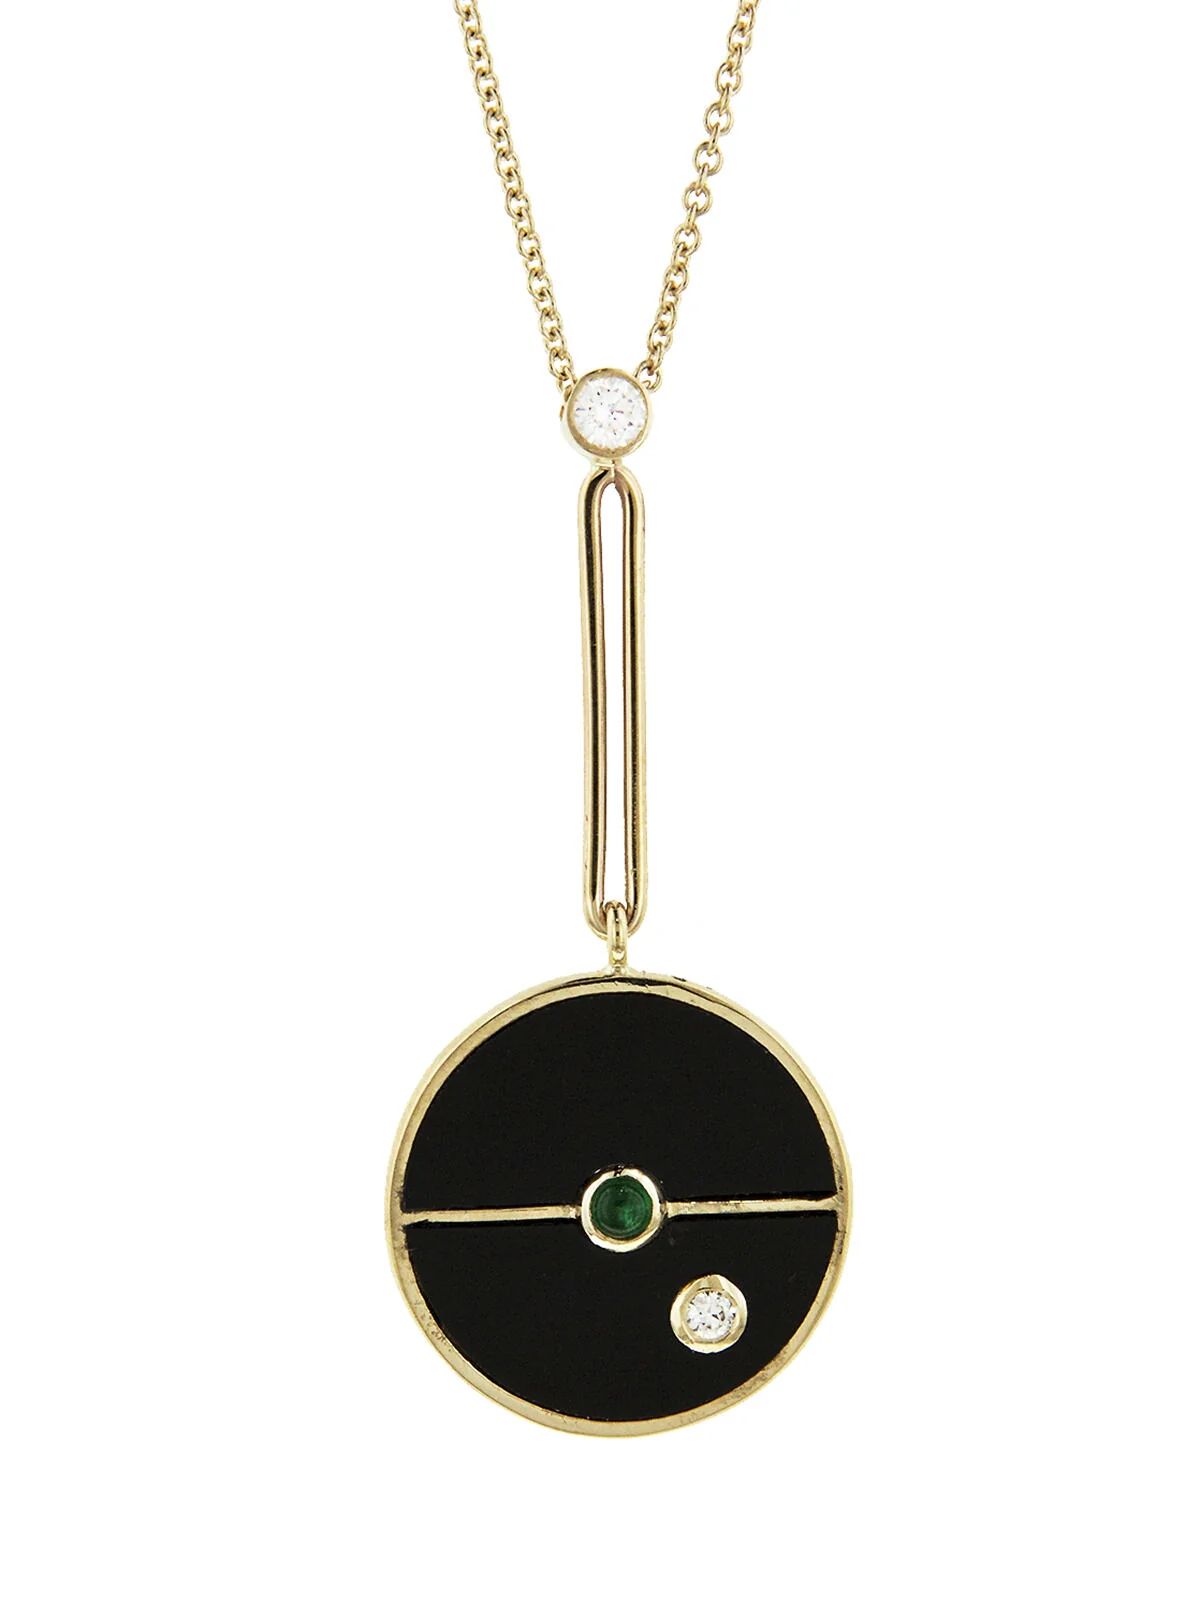 Signature Black Onyx & Emerald Compass Yellow Gold Necklace | YLANG 23